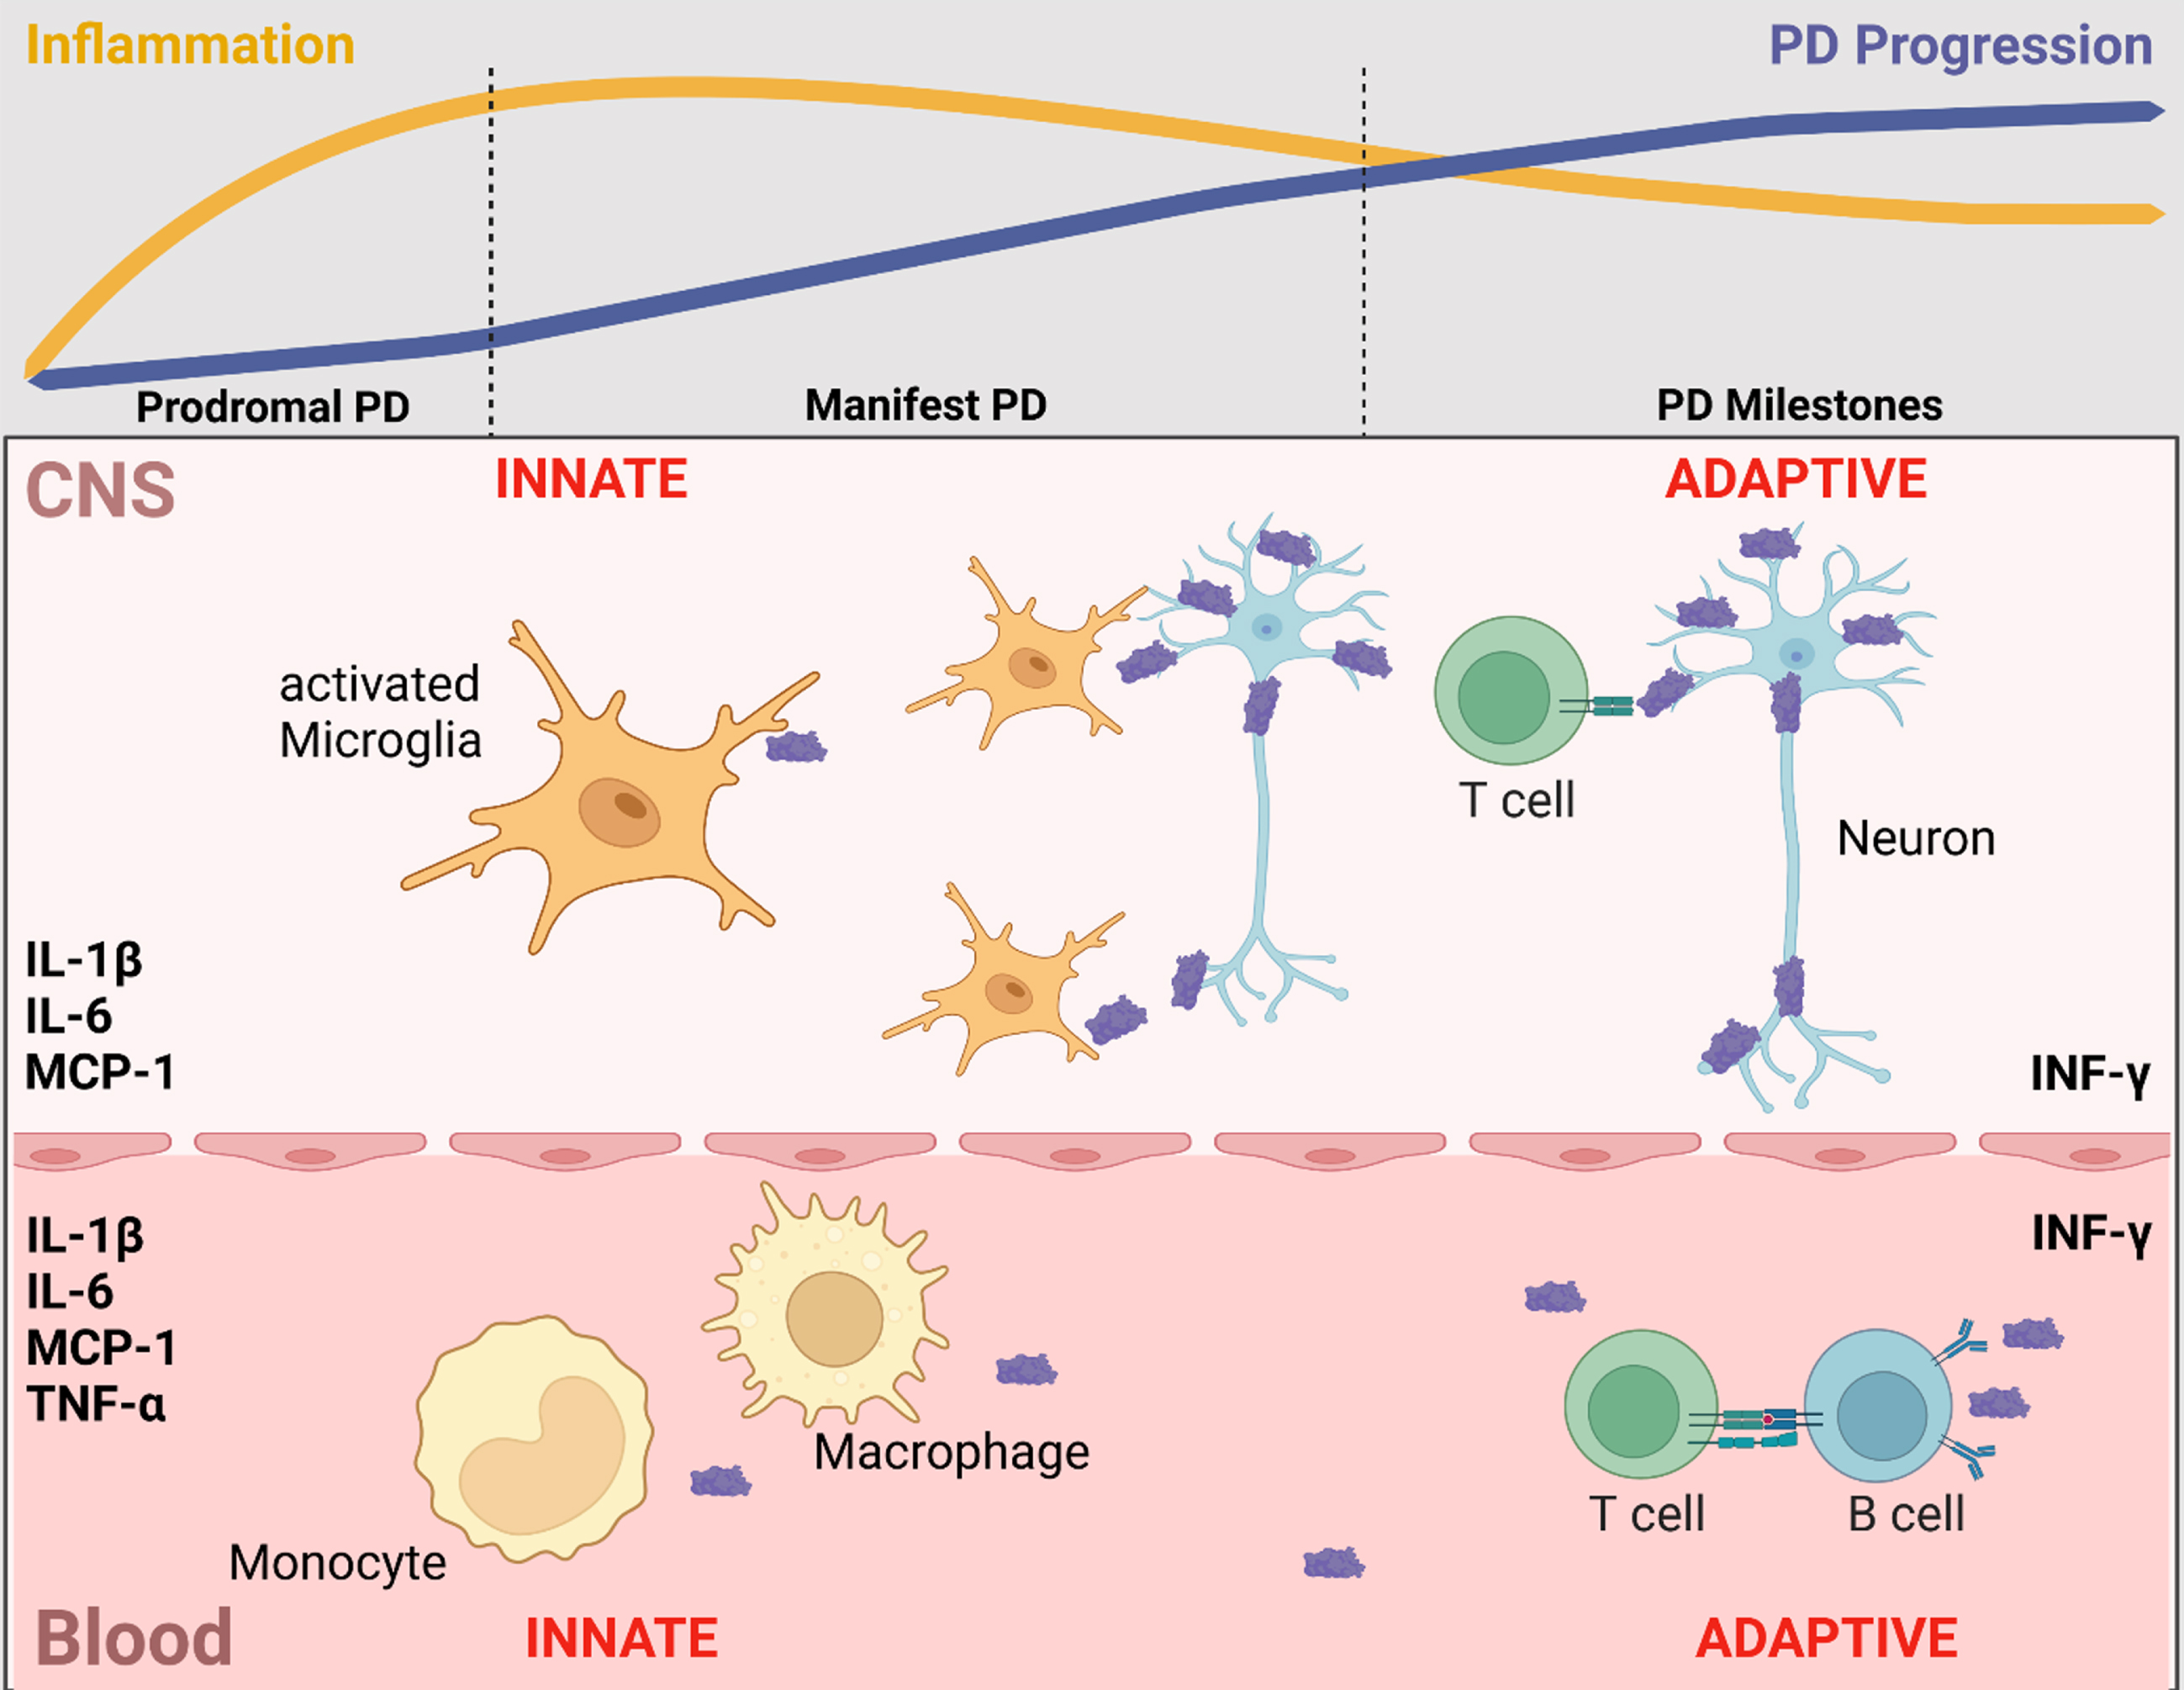 Inflammatory markers in blood and CSF that are associated with clinical trajectories, disease progression, and neurodegenerative/disease-specific protein levels. In line with evidence from post-mortem and cell studies, blood and CSF levels of inflammatory markers indicate a contribution of the innate and adaptive immune system in both CNS and periphery. Of these, the most frequently reported inflammatory markers in blood and CSF that are associated with clinical trajectories, disease progression and neurodegenerative/disease-specific protein levels are IL-1β, IL-6, INF-γ, MCP-1 and TNF-α. Notably, inflammation is maximized in the early disease stages and maintains a chronic profile during the course of the disease. Figure created in BioRender.com.